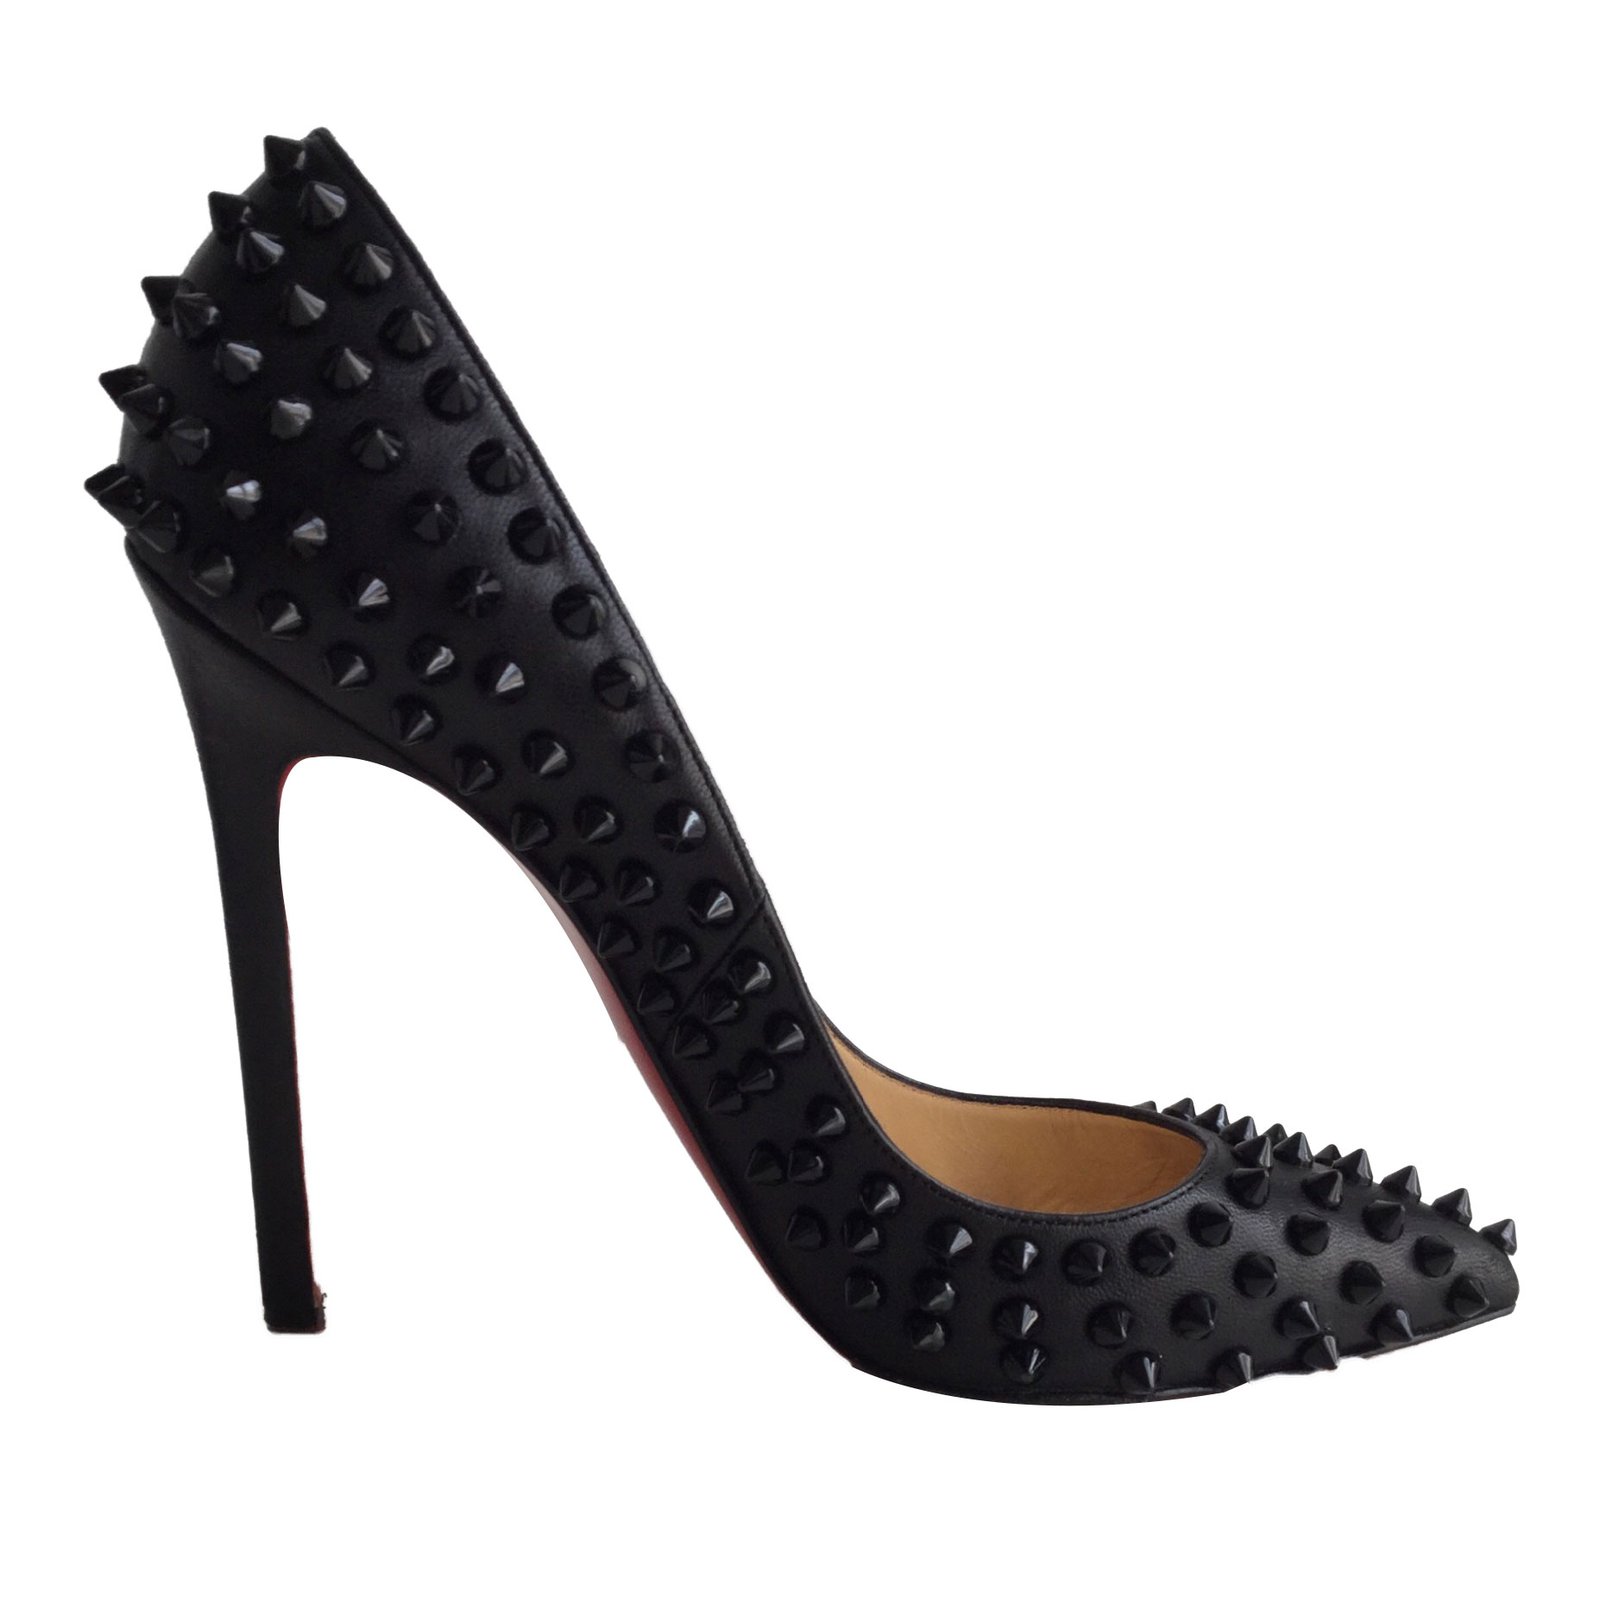 Christian Louboutin Pigalle spike Heels 